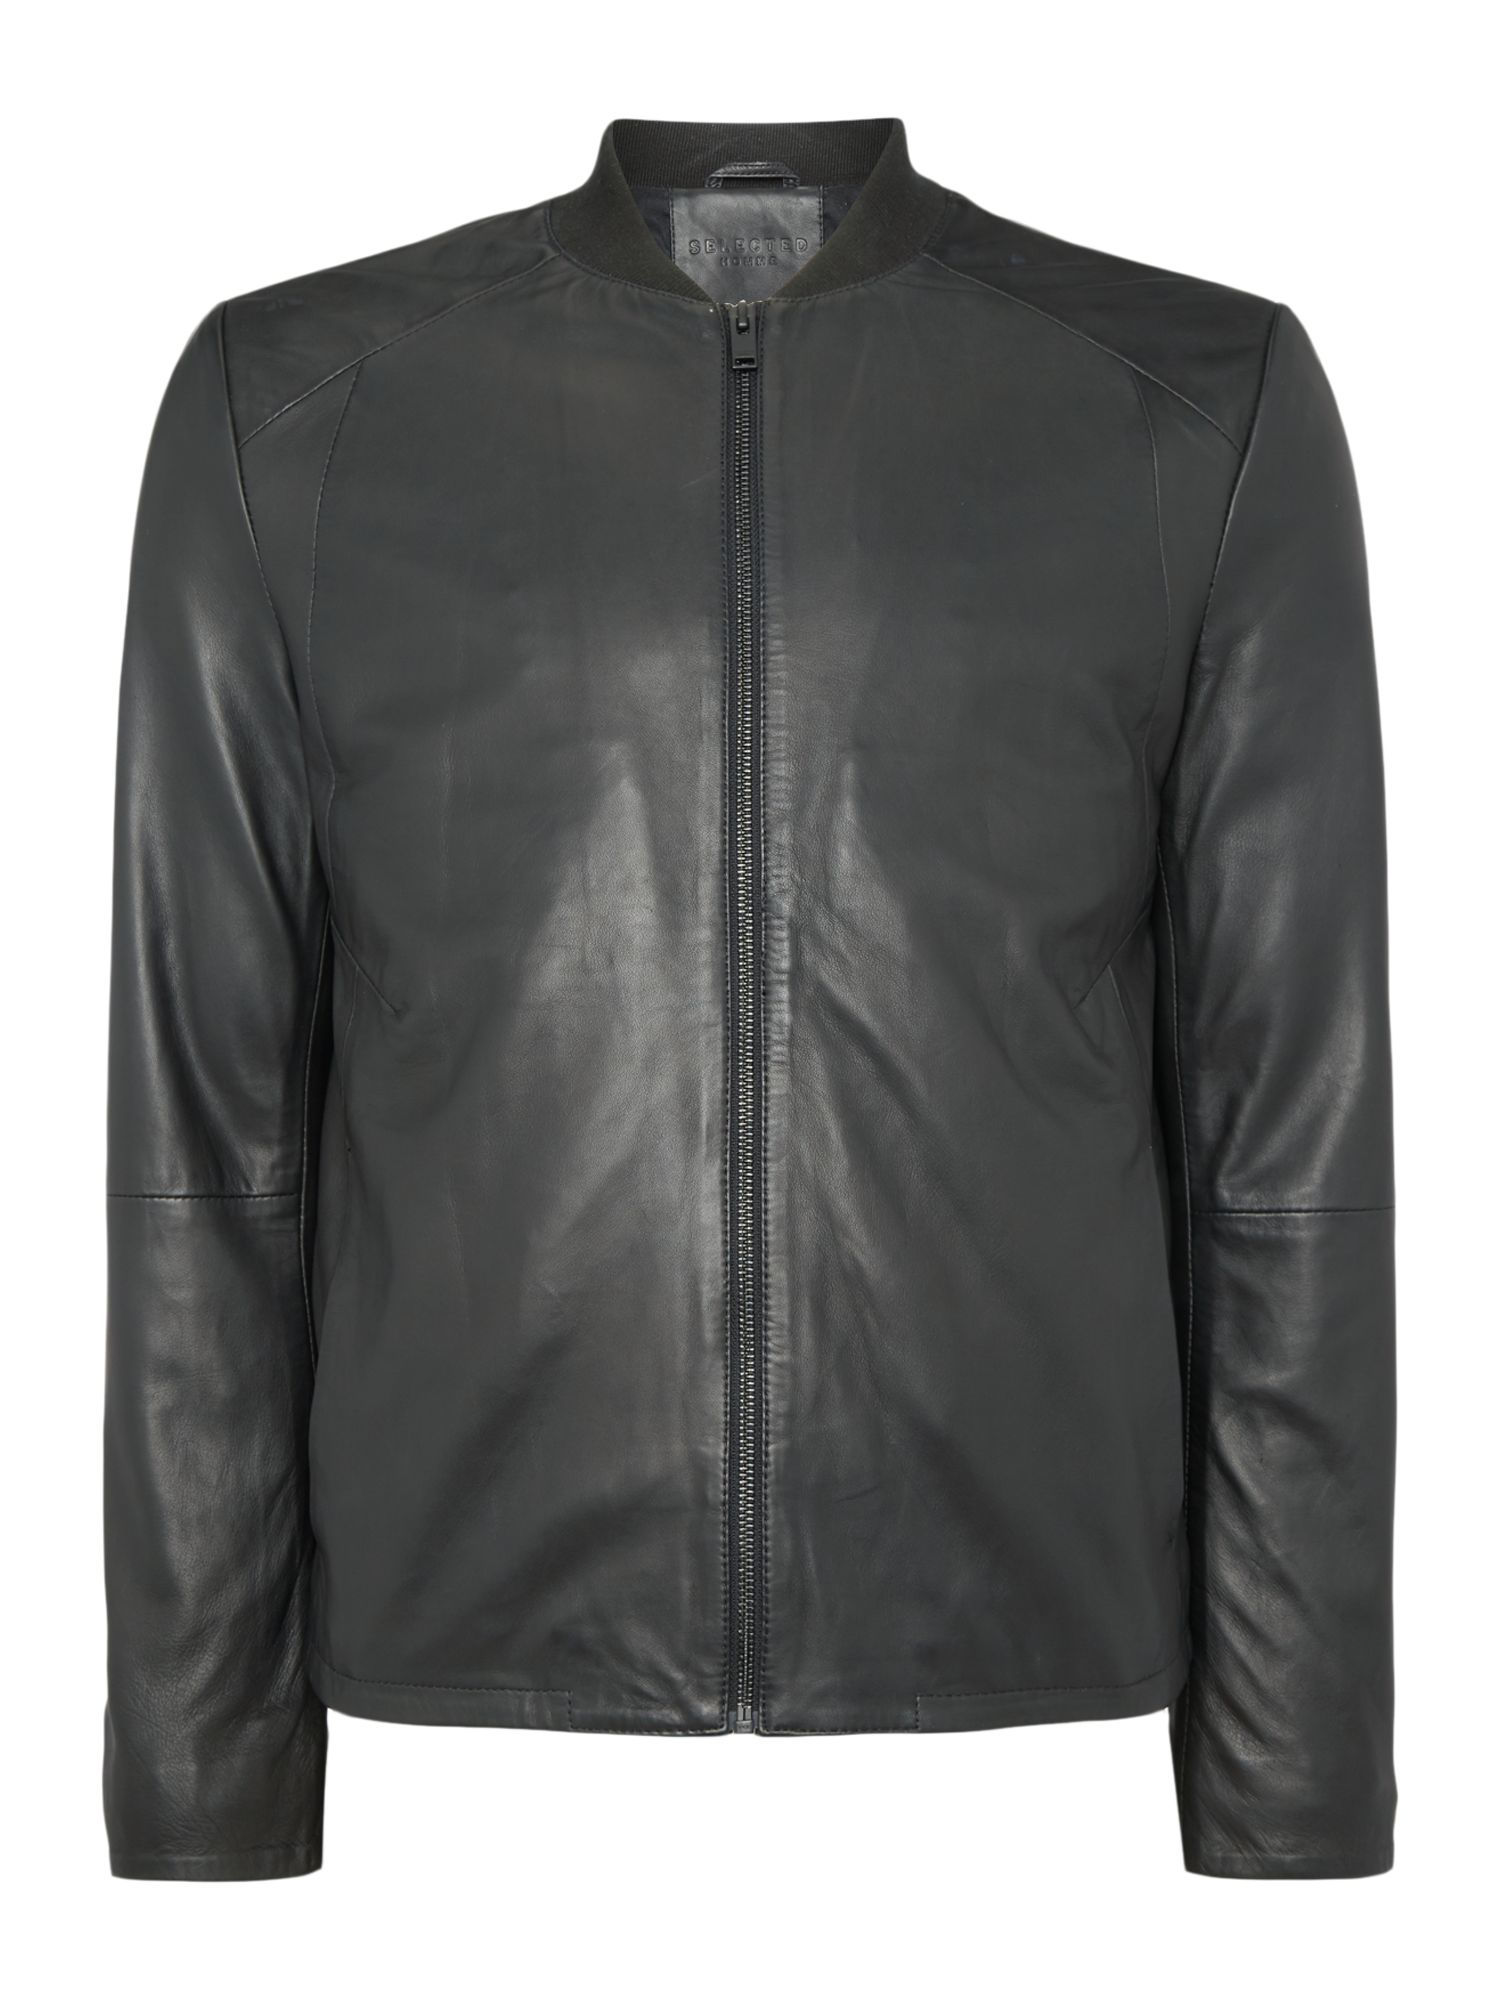 Selected Clean Leather Jacket in Black for Men | Lyst